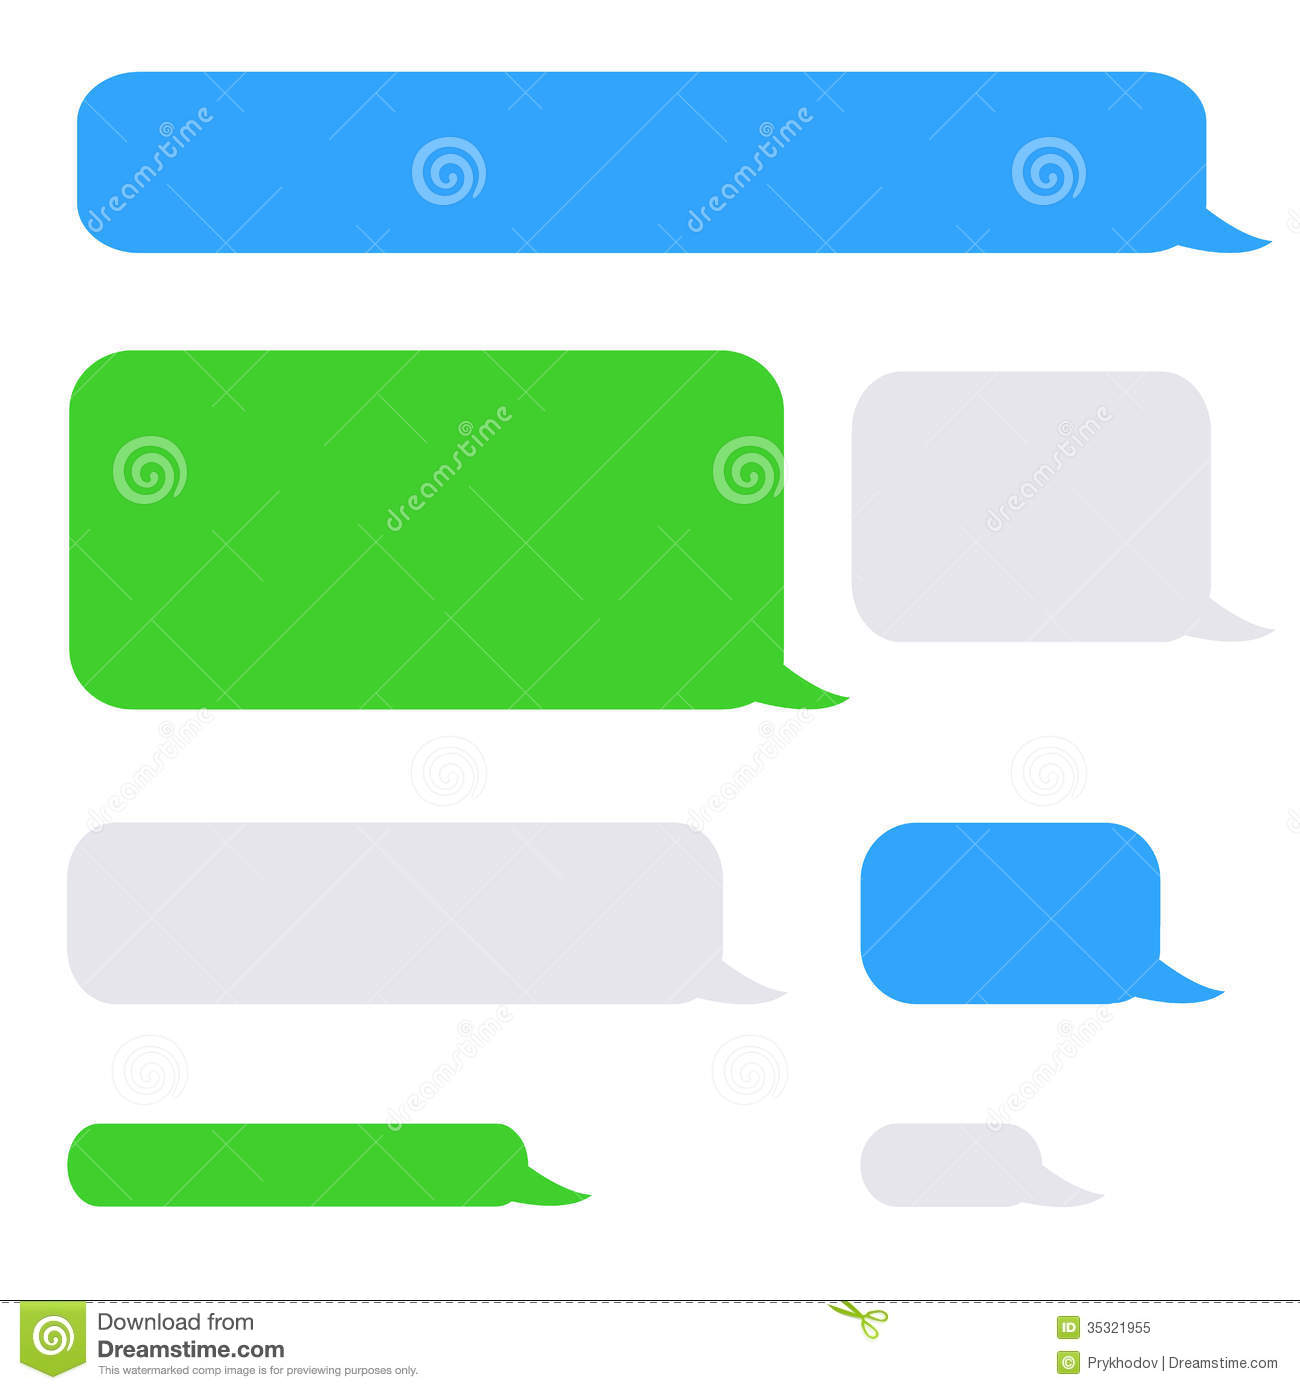 Background Phone Sms Chat Bubbles Royalty Free Stock Photo   Image    